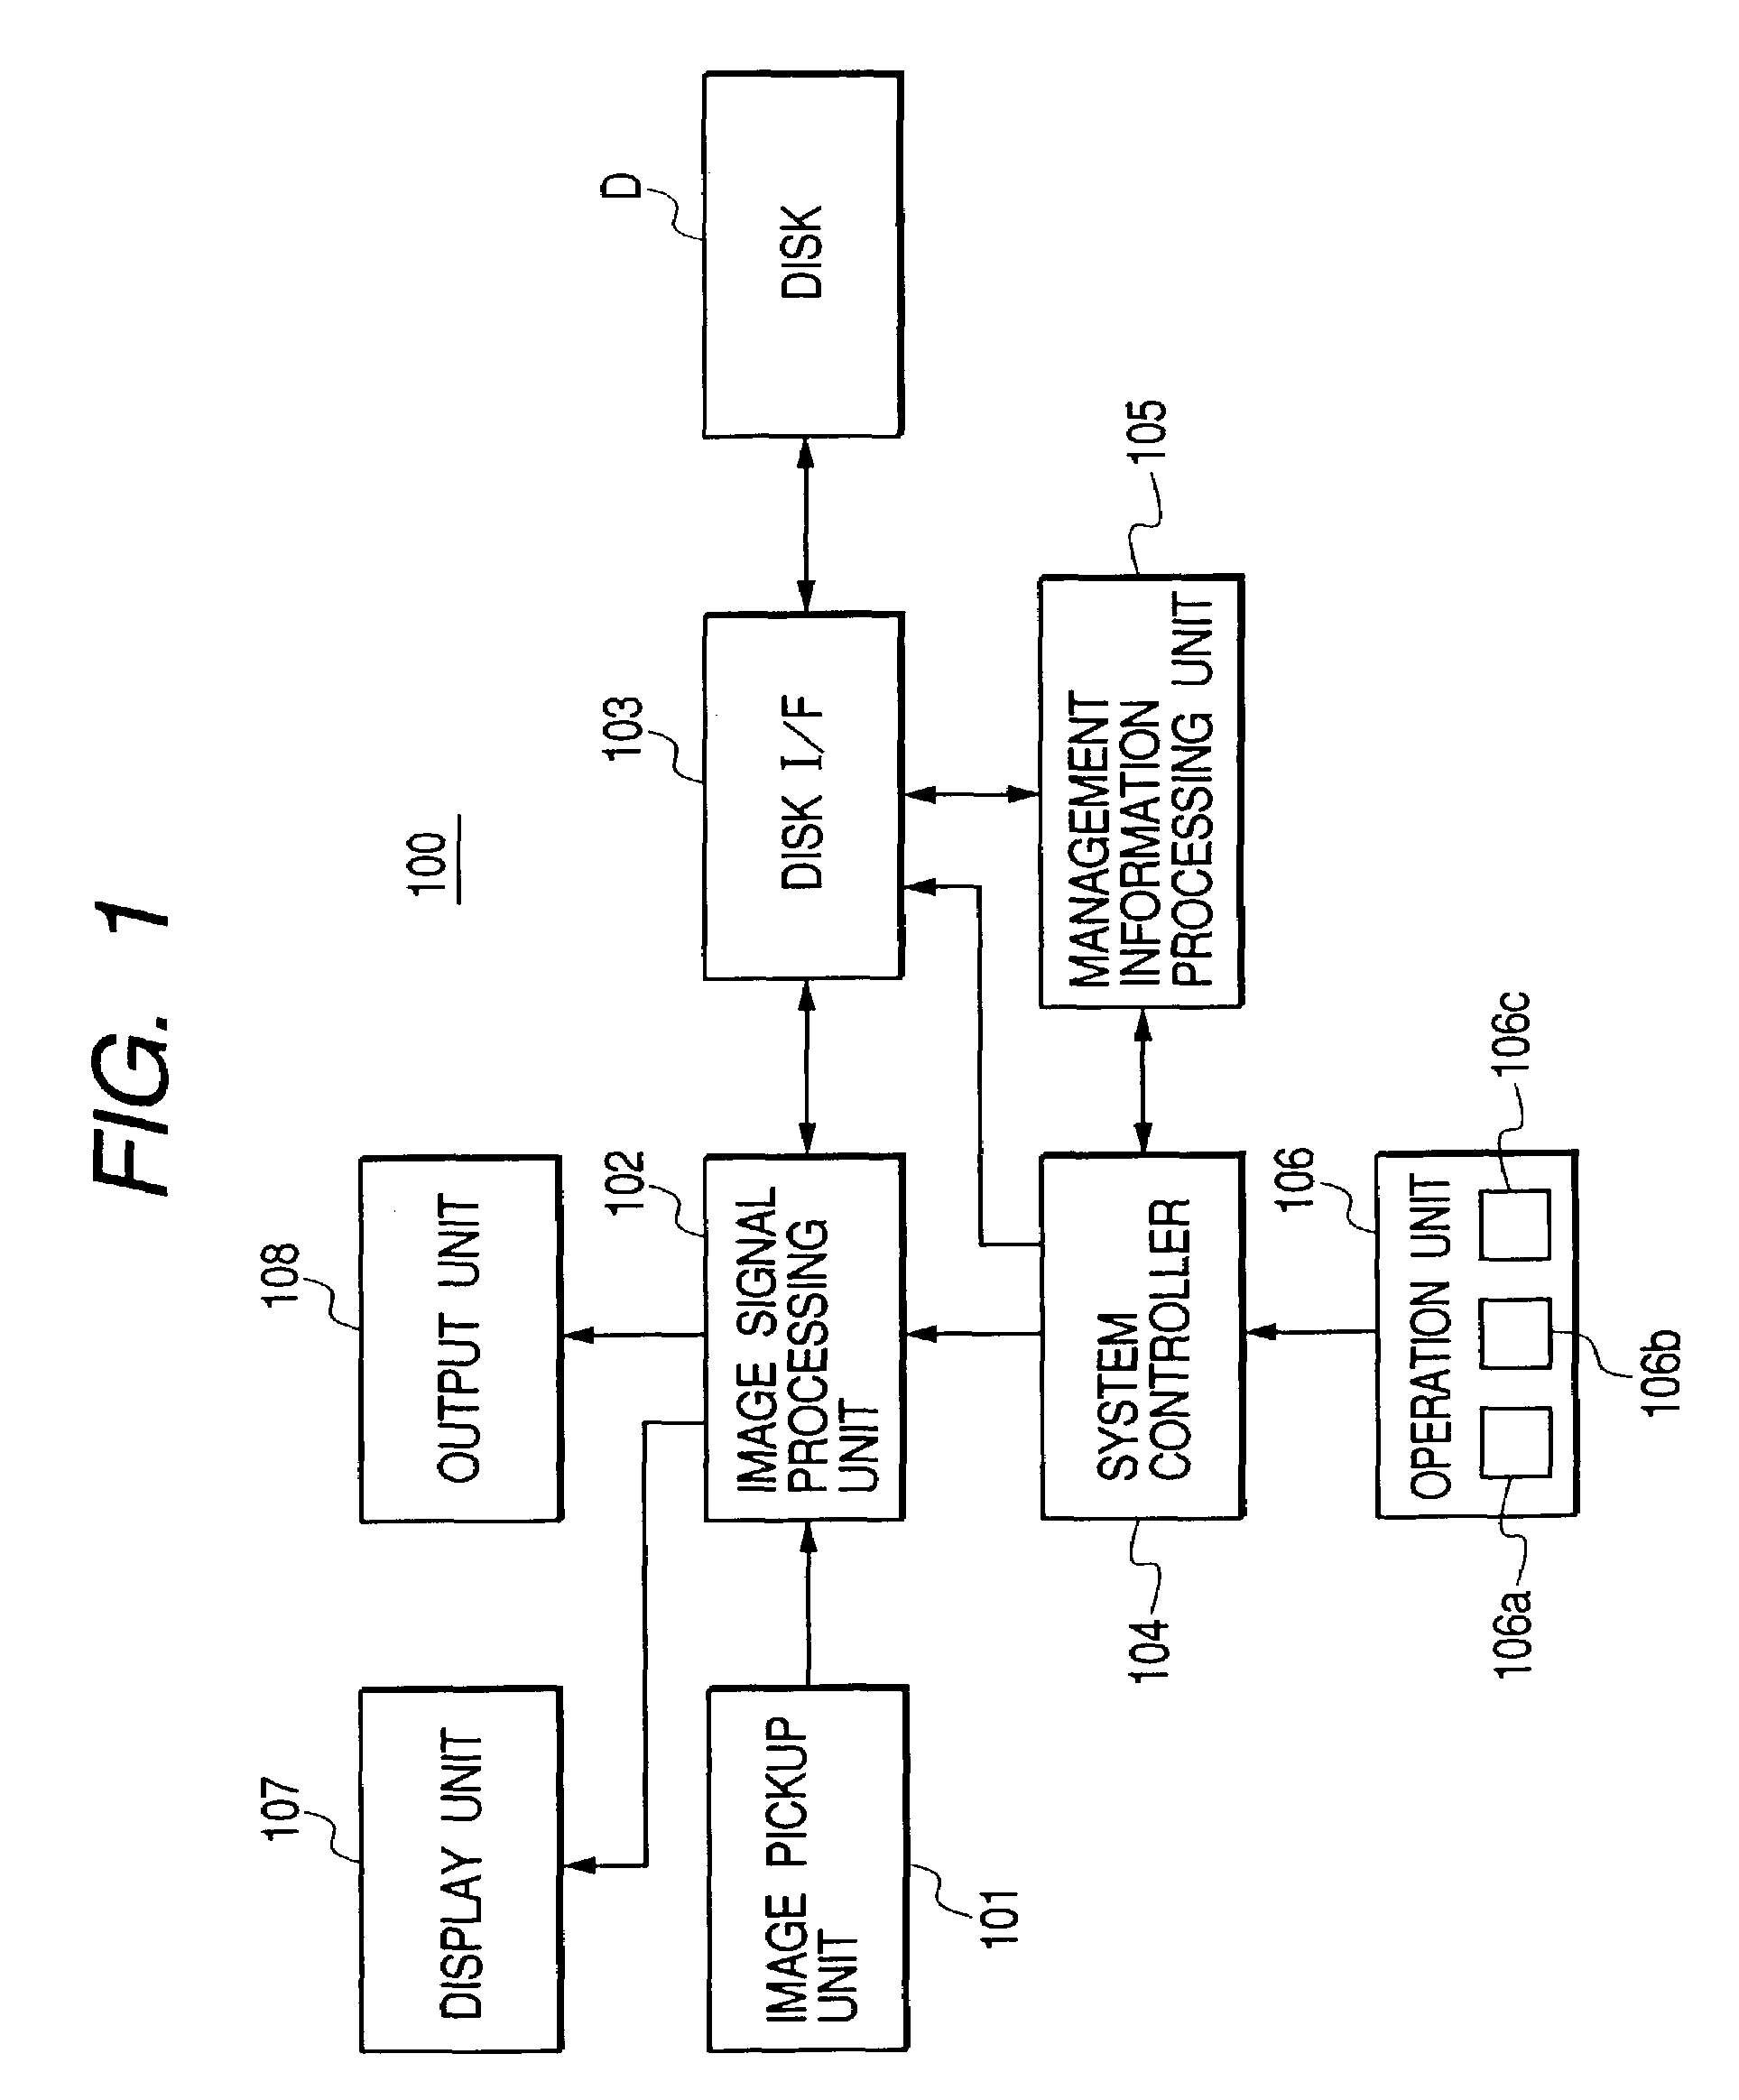 Imaging apparatus with selective allocation of first and second image data based on operation instruction